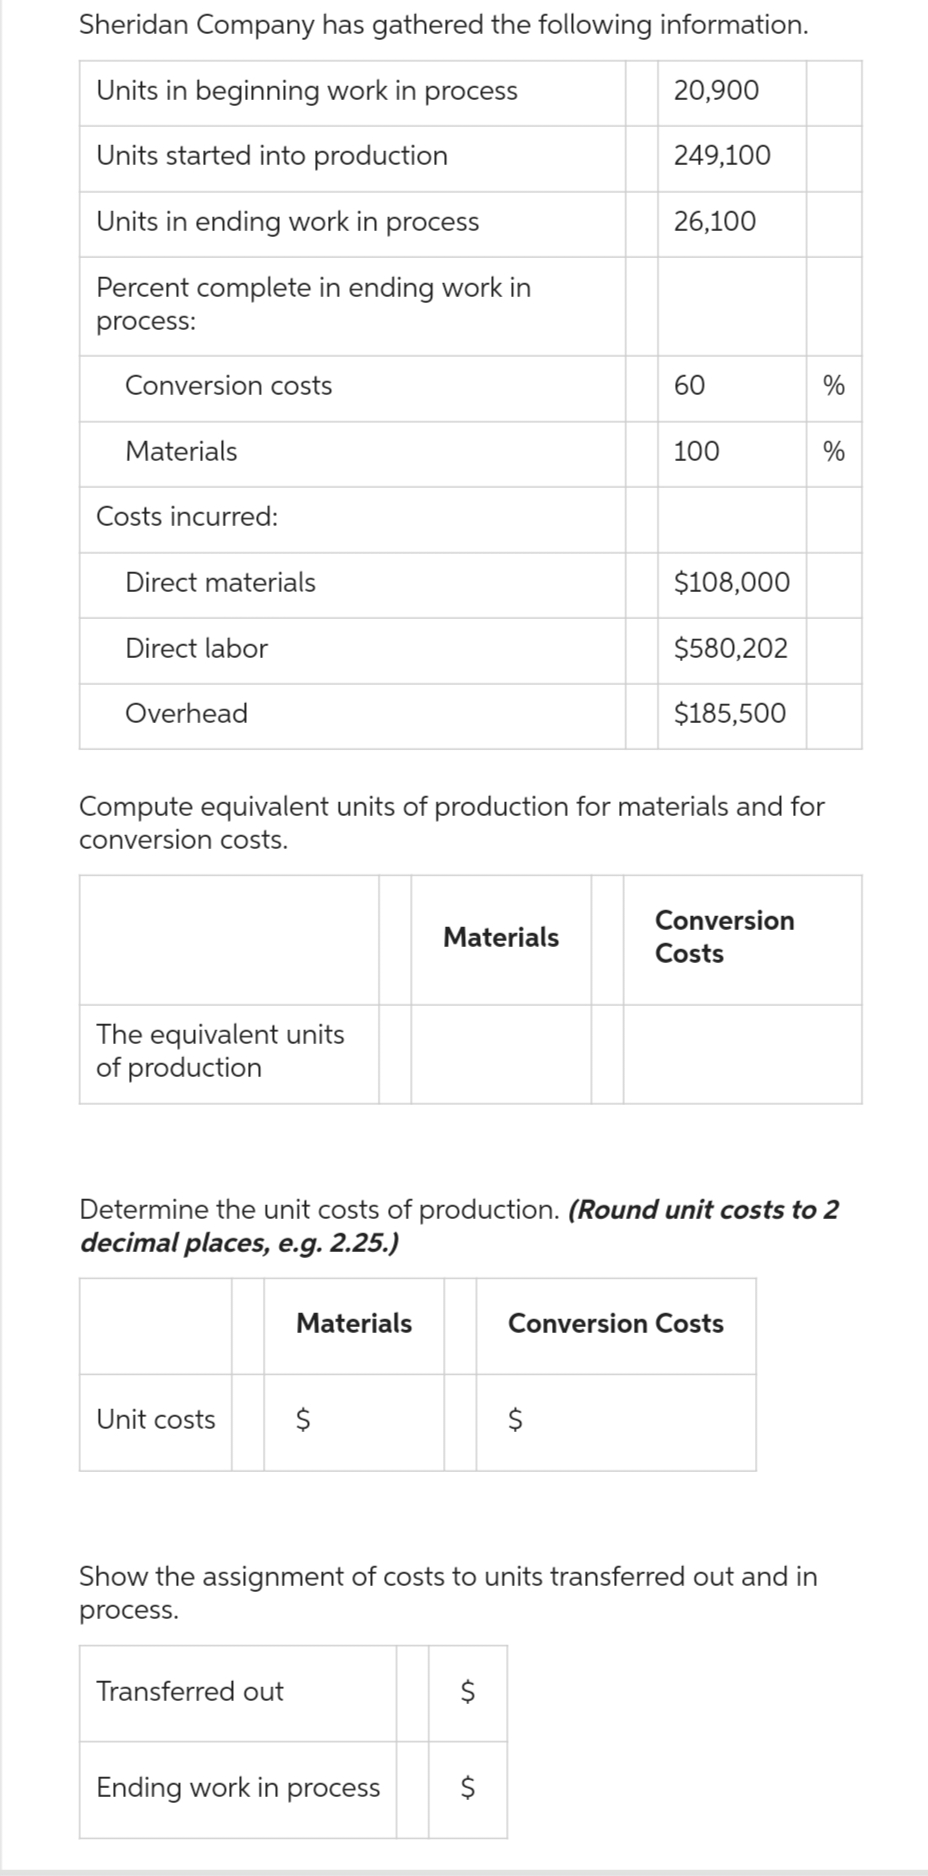 Sheridan Company has gathered the following information.
Units in beginning work in process
Units started into production
Units in ending work in process
Percent complete in ending work in
process:
Conversion costs
Materials
Costs incurred:
Direct materials
Direct labor
Overhead
The equivalent units
of production
Unit costs
Transferred out
Materials
Ending work in
$
Materials
20,900
Compute equivalent units of production for materials and for
conversion costs.
process
249,100
26,100
$
60
100
Determine the unit costs of production. (Round unit costs to 2
decimal places, e.g. 2.25.)
$108,000
$580,202
$185,500
Conversion
Costs
Show the assignment of costs to units transferred out and in
process.
Conversion Costs
%
%